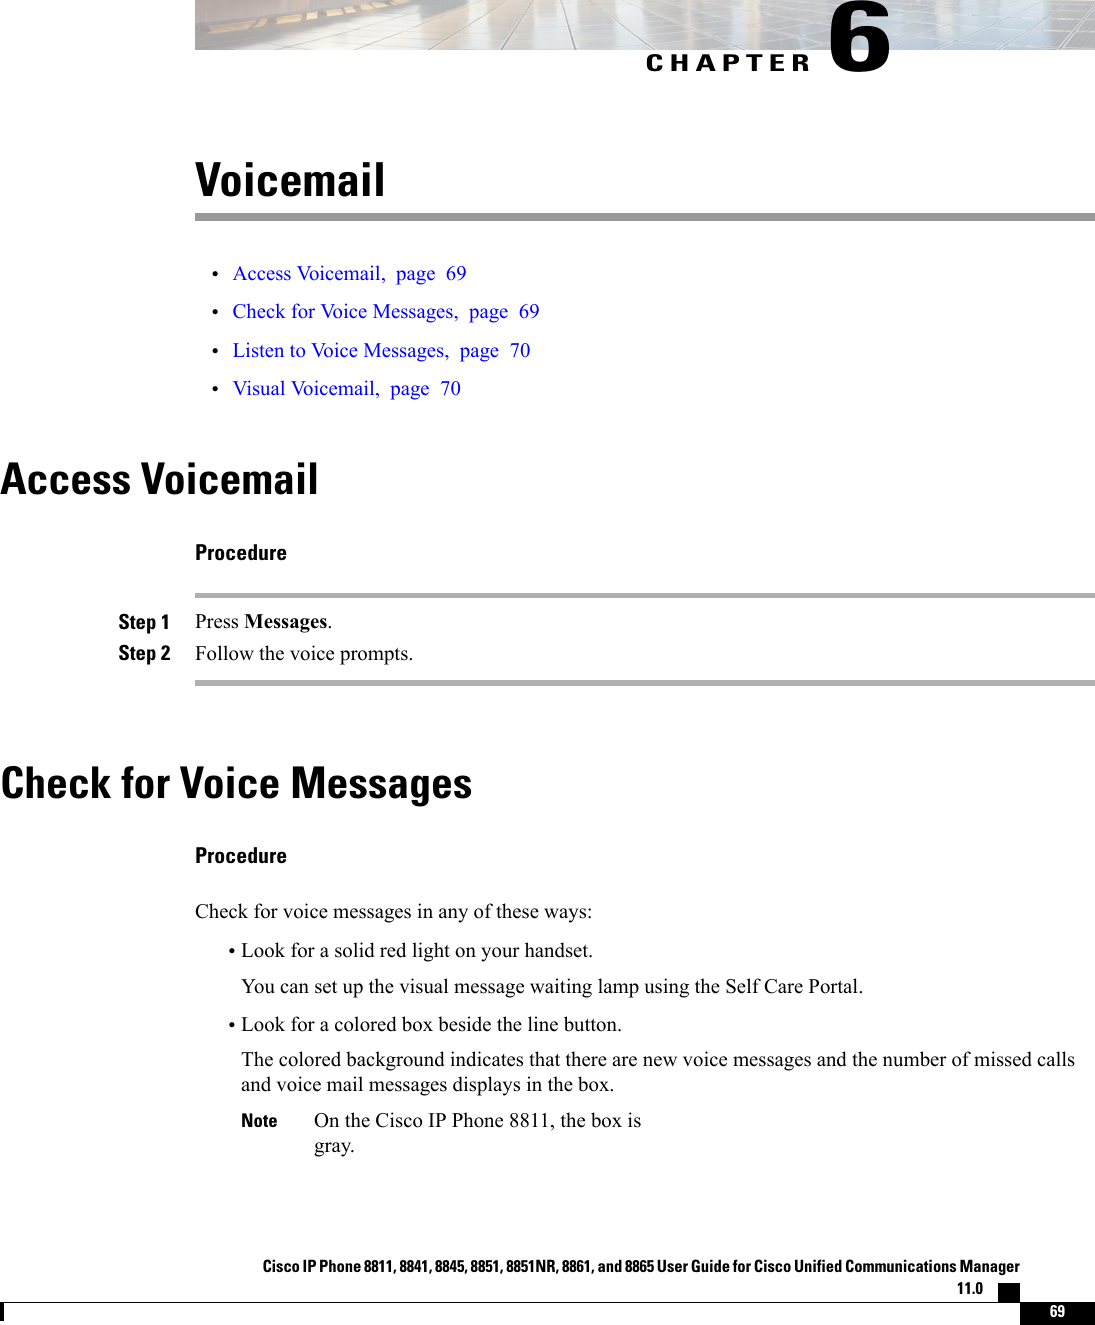 CHAPTER 6Voicemail•Access Voicemail, page 69•Check for Voice Messages, page 69•Listen to Voice Messages, page 70•Visual Voicemail, page 70Access VoicemailProcedureStep 1 Press Messages.Step 2 Follow the voice prompts.Check for Voice MessagesProcedureCheck for voice messages in any of these ways:•Look for a solid red light on your handset.You can set up the visual message waiting lamp using the Self Care Portal.•Look for a colored box beside the line button.The colored background indicates that there are new voice messages and the number of missed callsand voice mail messages displays in the box.On the Cisco IP Phone 8811, the box isgray.NoteCisco IP Phone 8811, 8841, 8845, 8851, 8851NR, 8861, and 8865 User Guide for Cisco Unified Communications Manager11.0    69